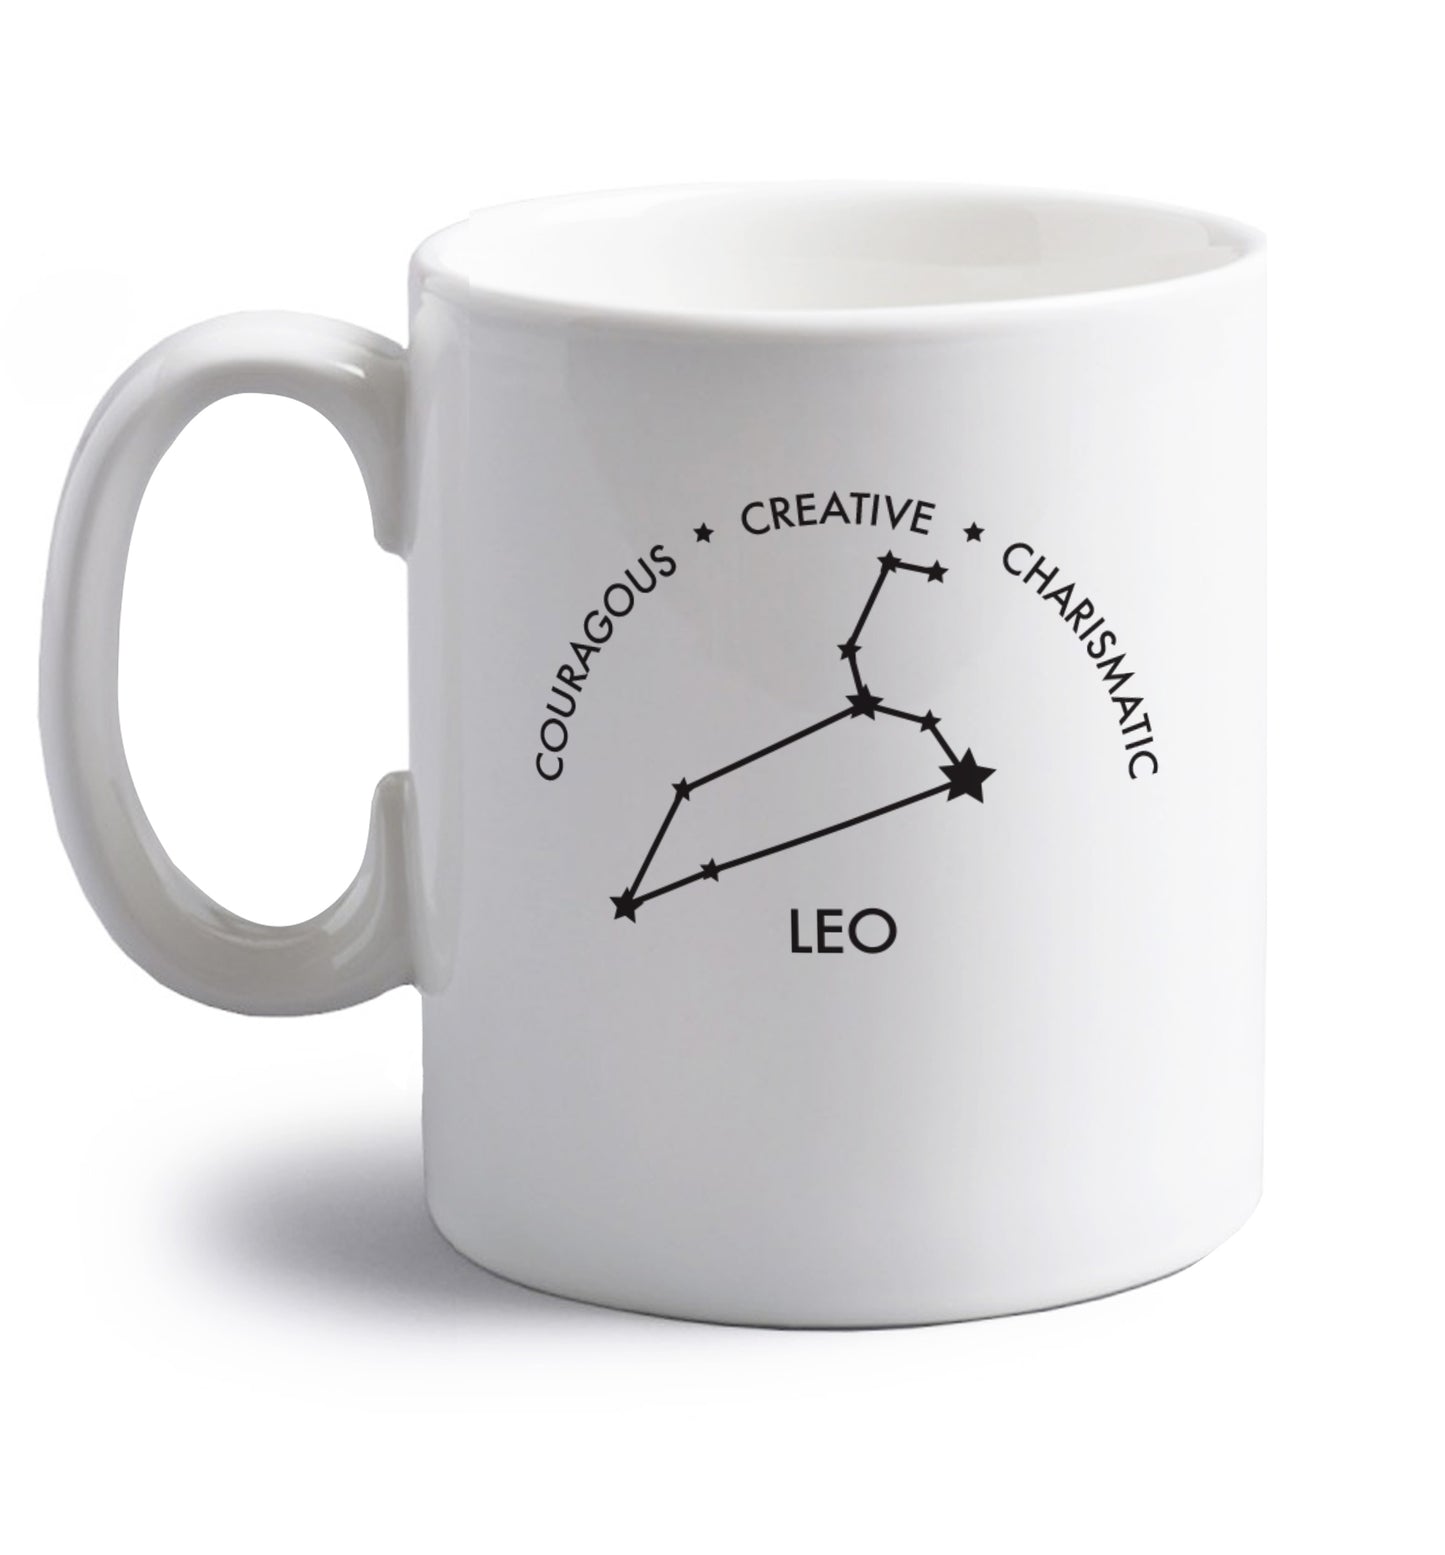 Leo - Courageous | Creative | Charismatic right handed white ceramic mug 